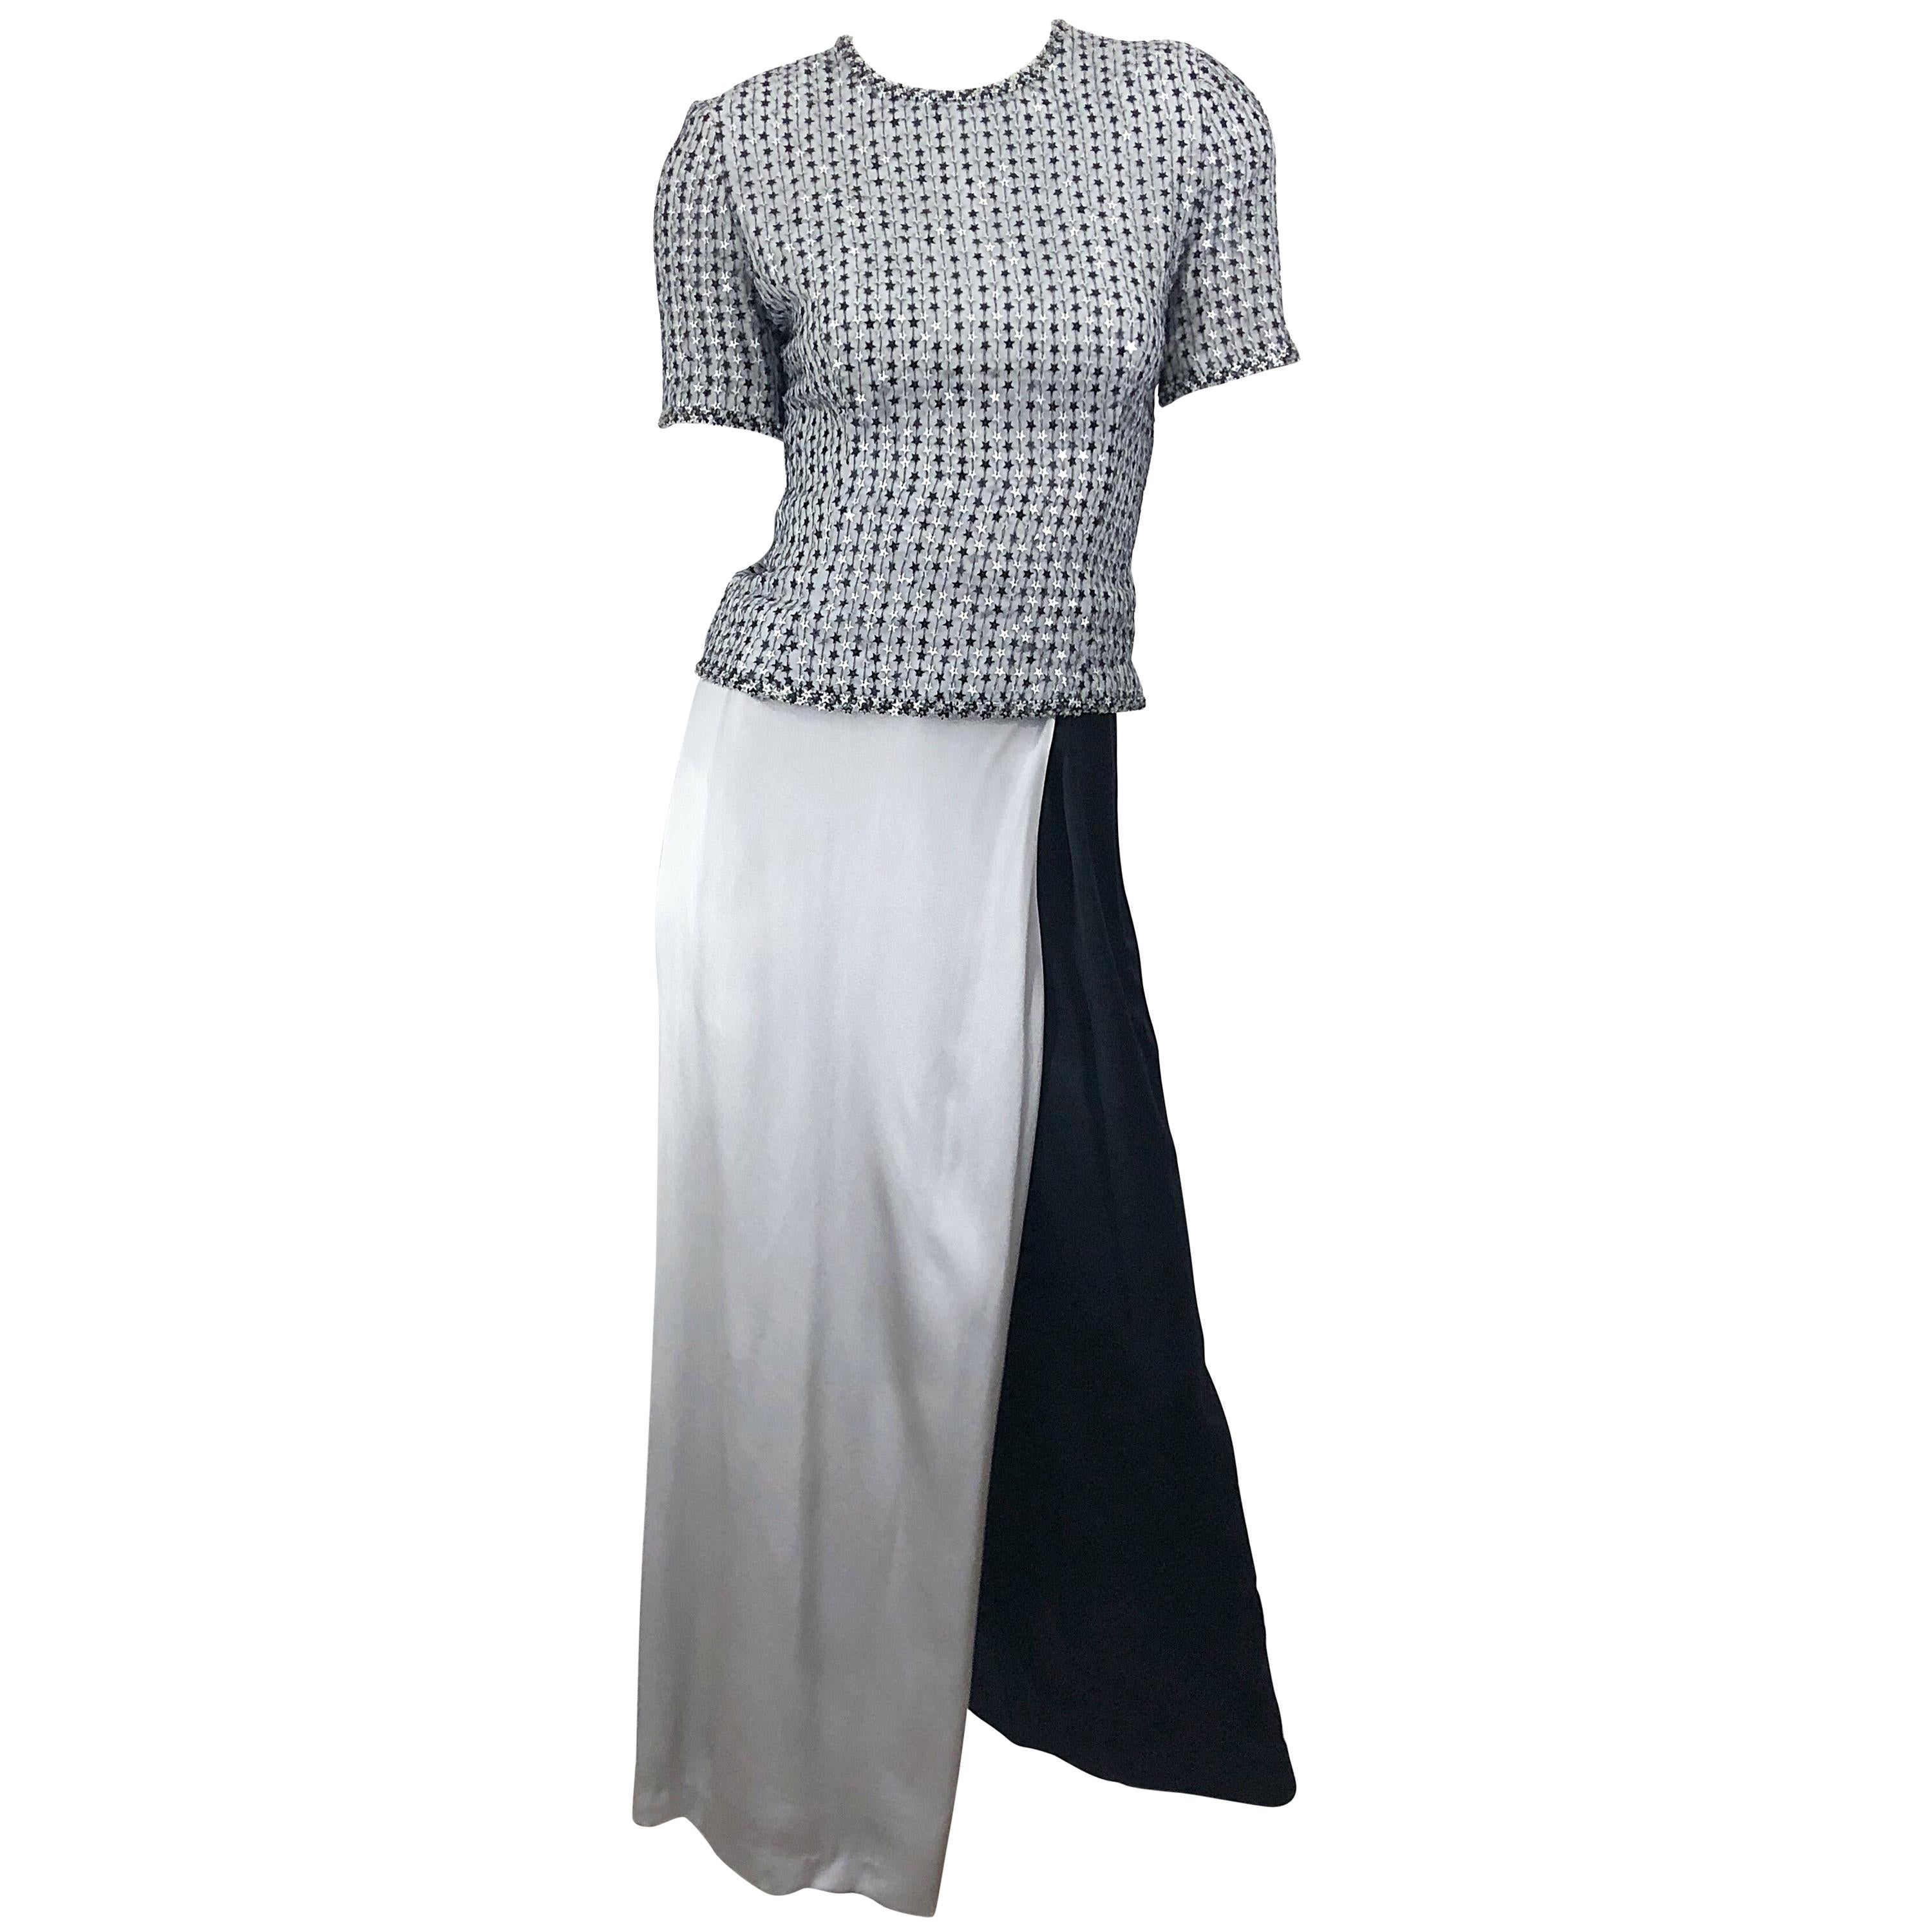 1980s Tarquin Ebker Silver Grey + Black Silk Palazzo Pants and Star Sequin Top